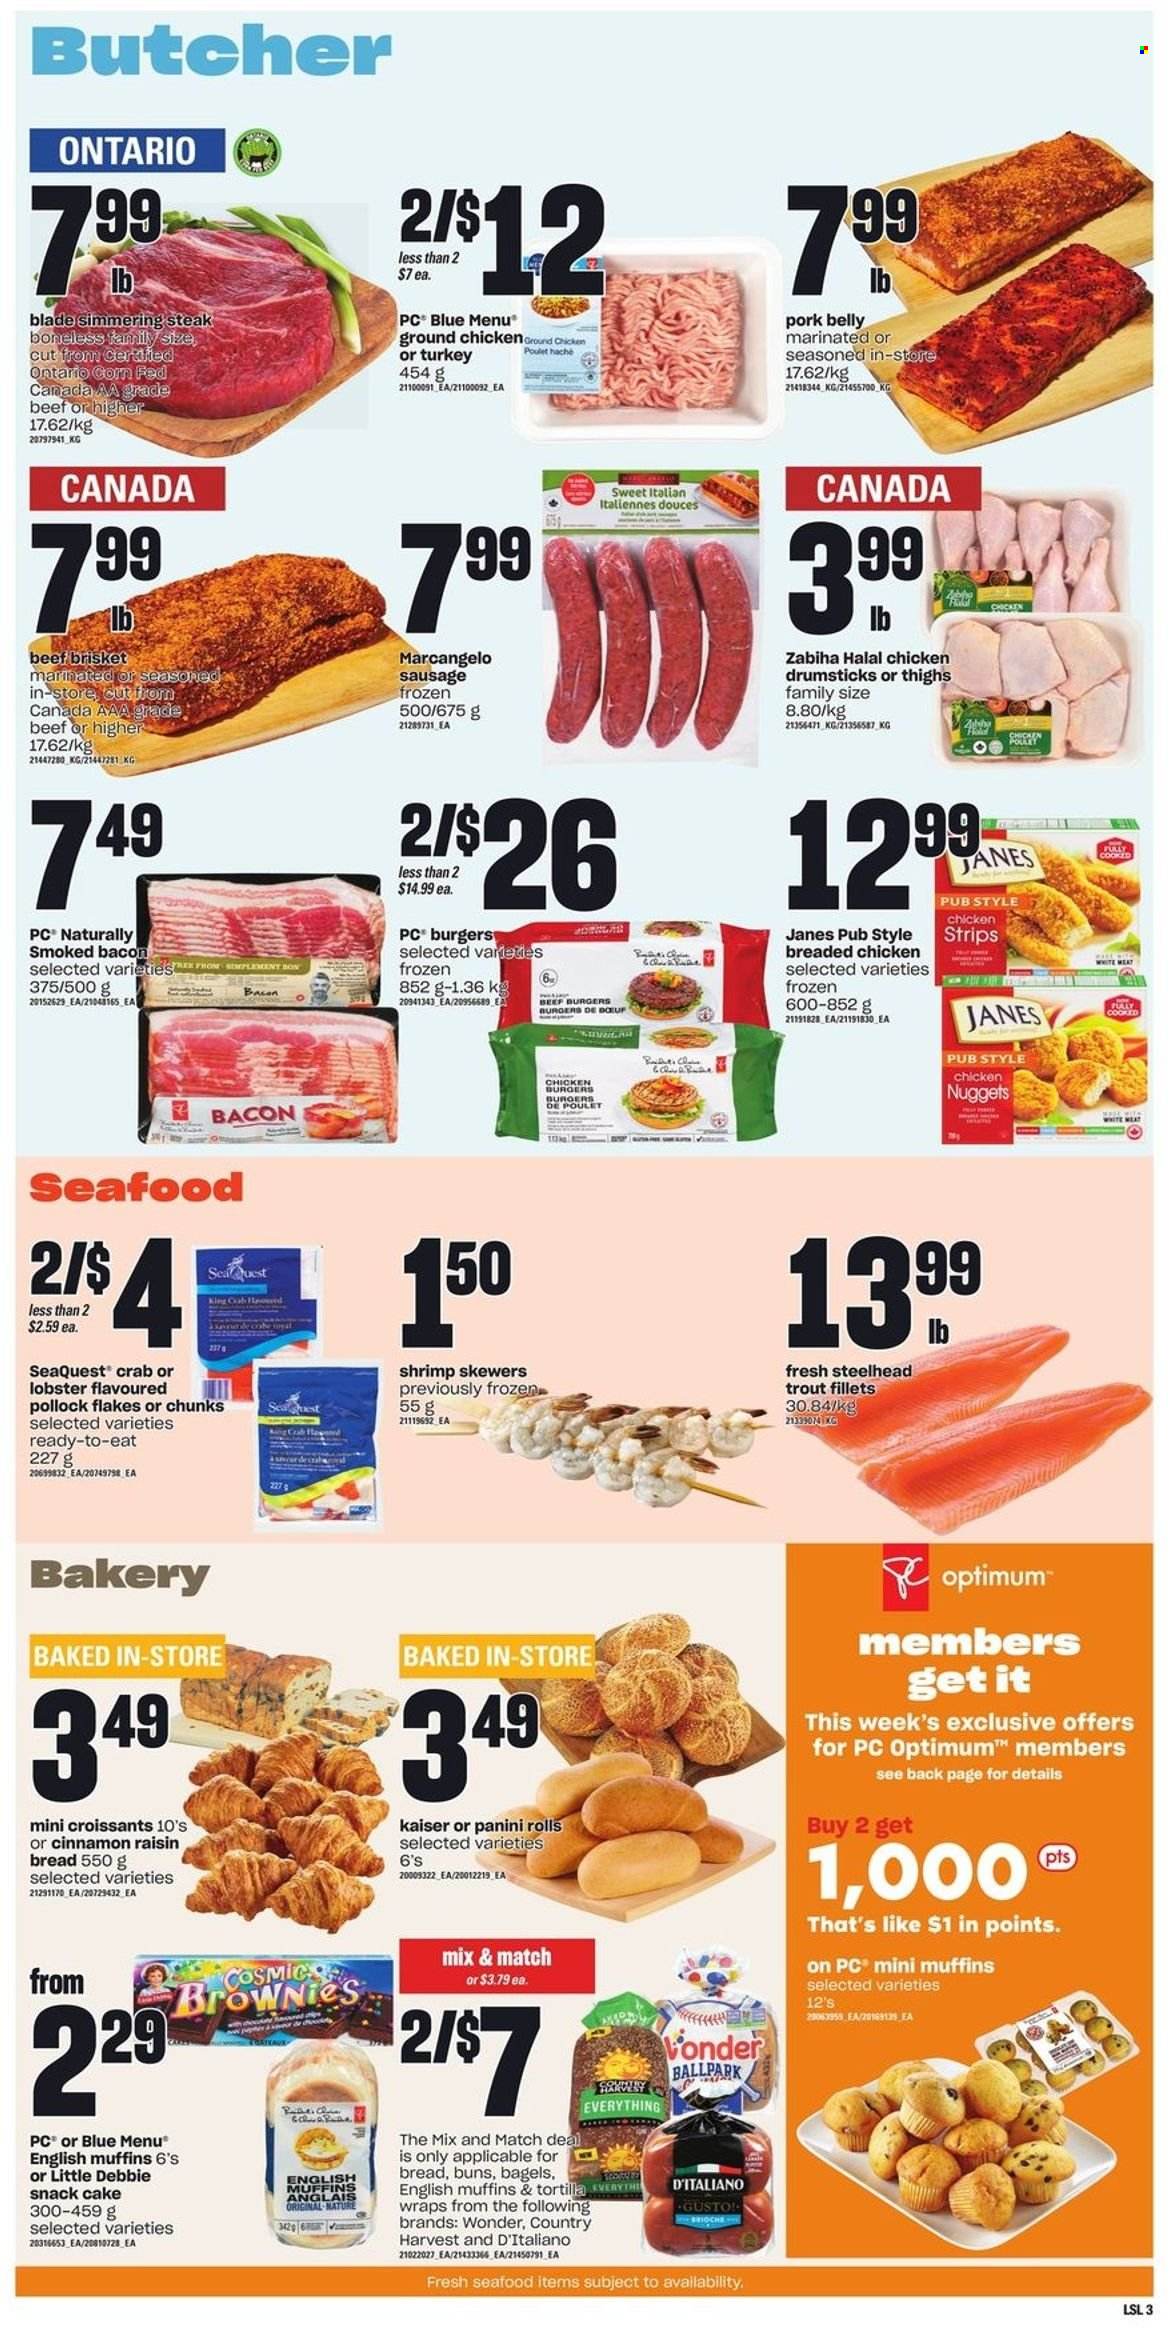 thumbnail - Loblaws Flyer - May 12, 2022 - May 18, 2022 - Sales products - bagels, english muffins, tortillas, croissant, panini, buns, wraps, brownies, lobster, trout, pollock, seafood, crab, shrimps, nuggets, hamburger, fried chicken, beef burger, bacon, sausage, Country Harvest, strips, snack, snack cake, chicken drumsticks, chicken, beef meat, beef brisket, pork belly, pork meat, Optimum, steak. Page 4.